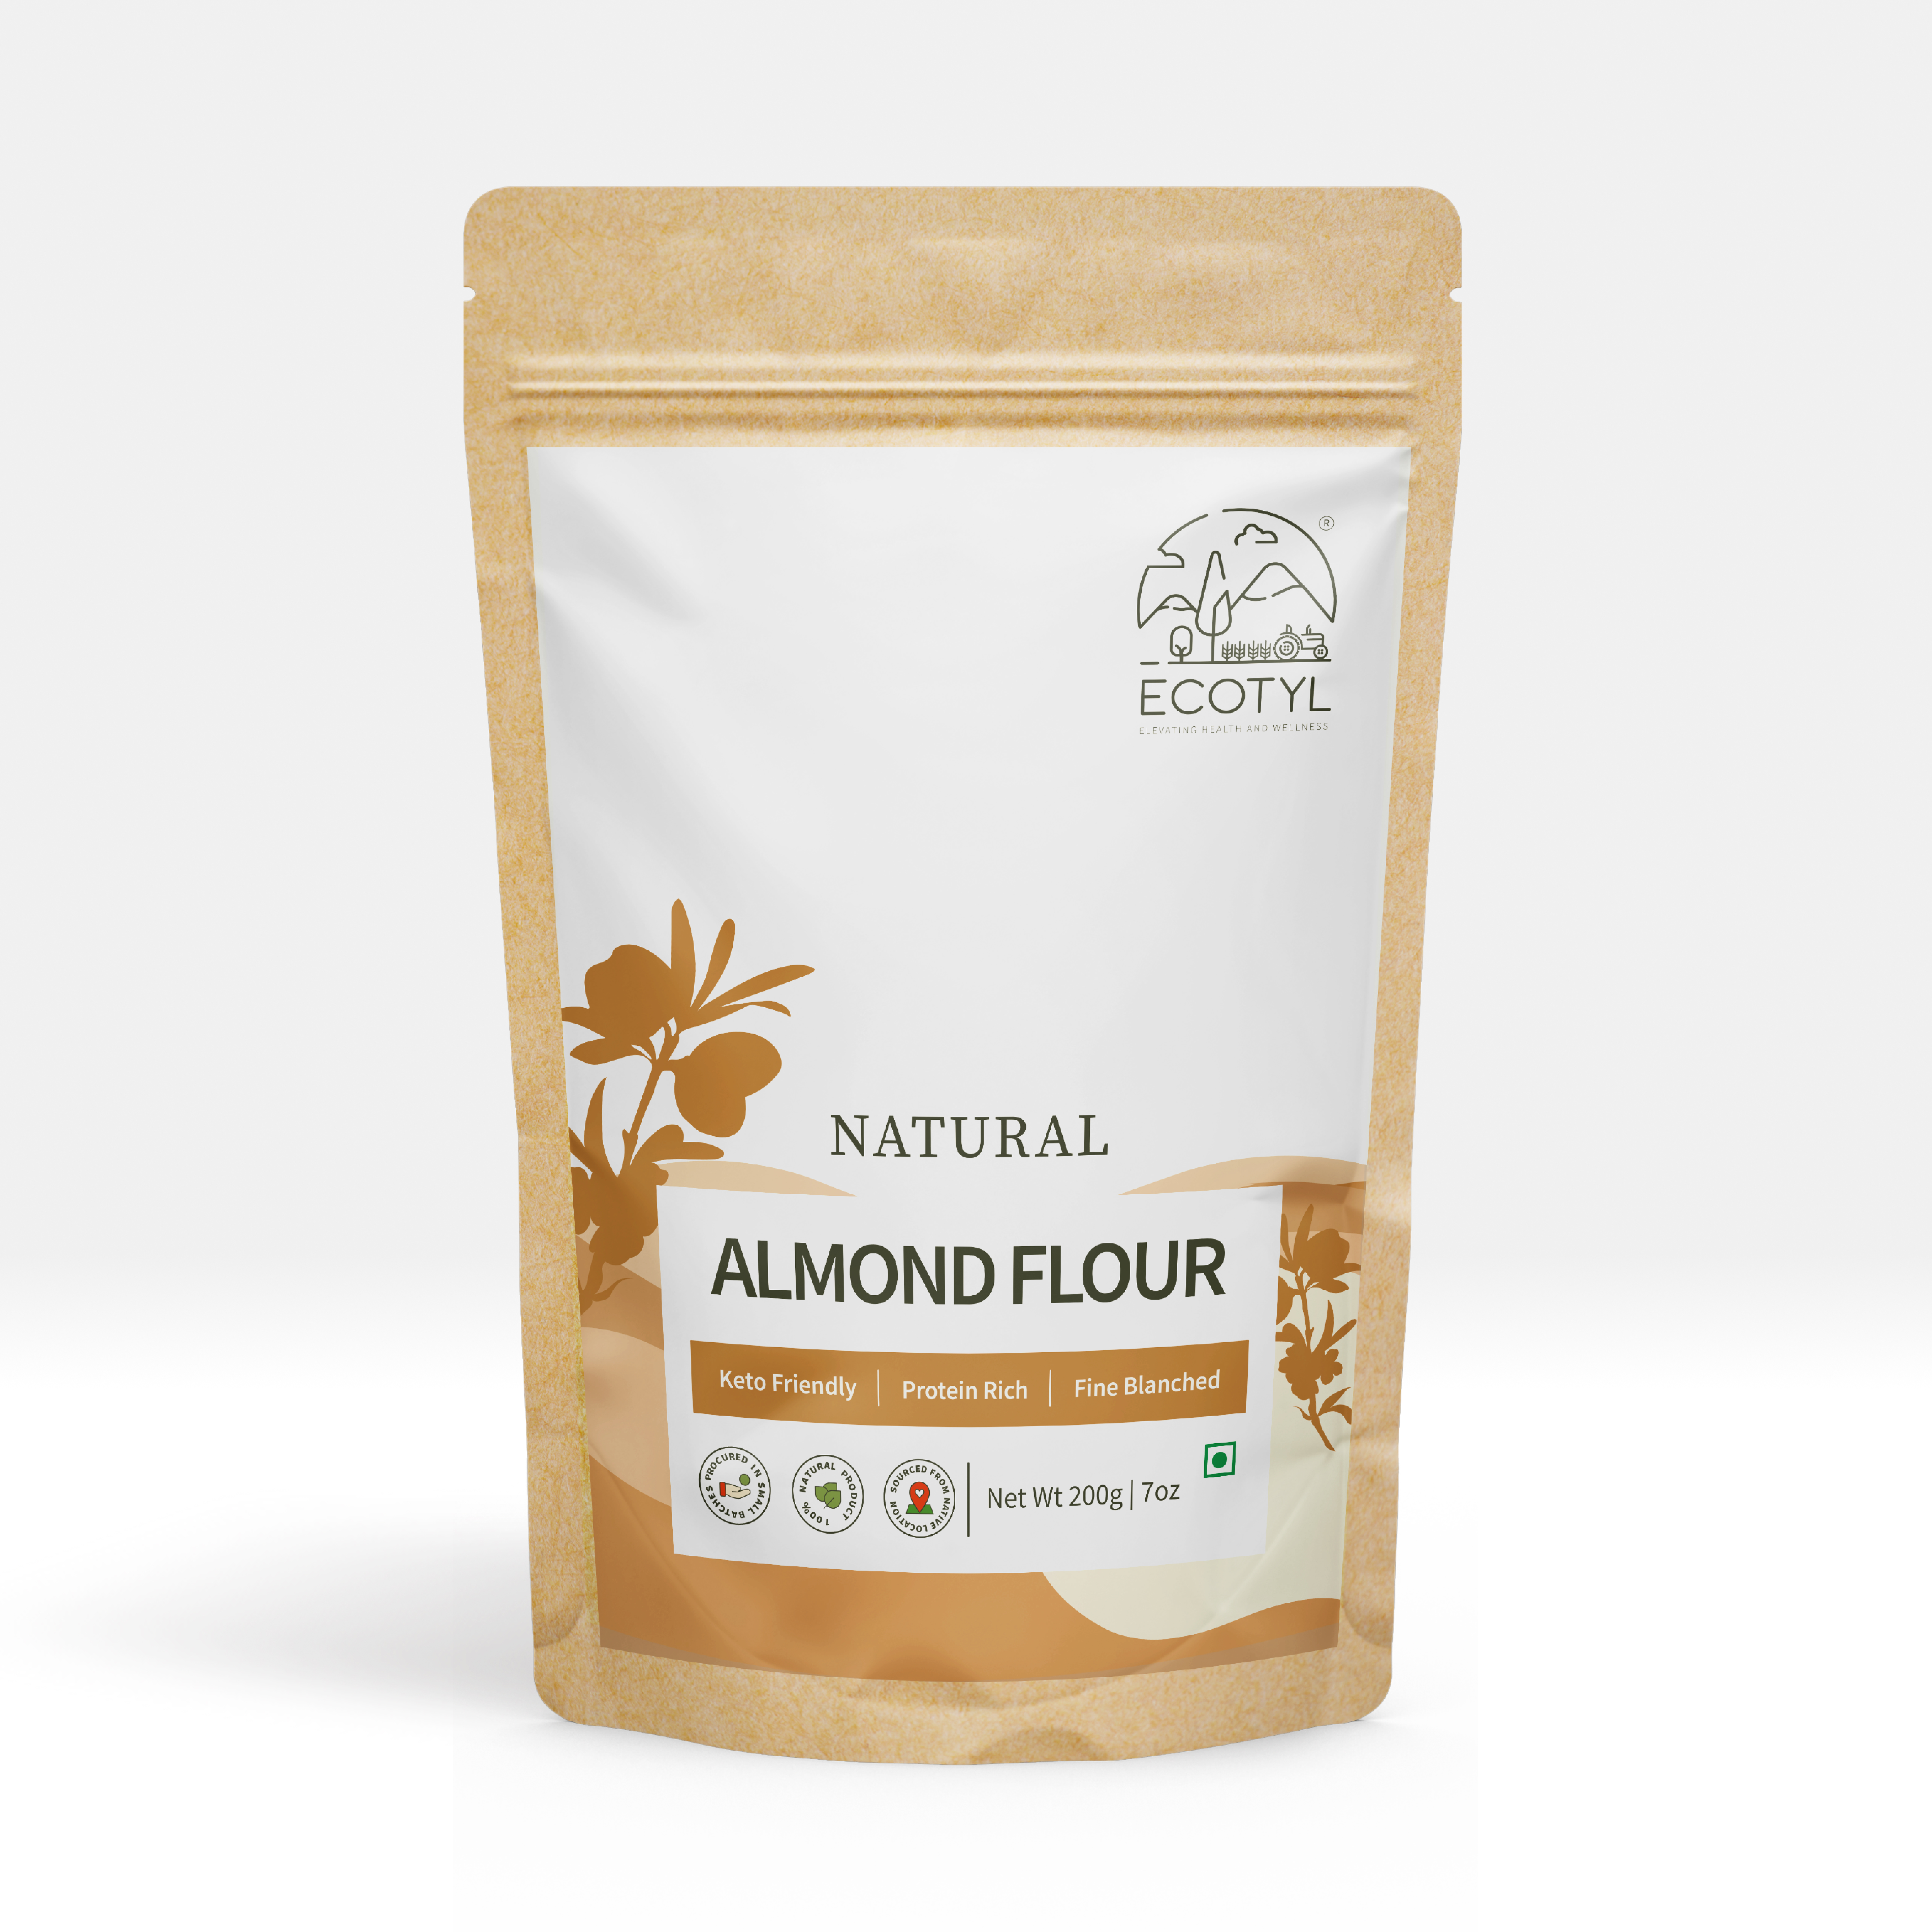 Buy Ecotyl Natural Almond Flour (Blanched) - 200g at Best Price Online